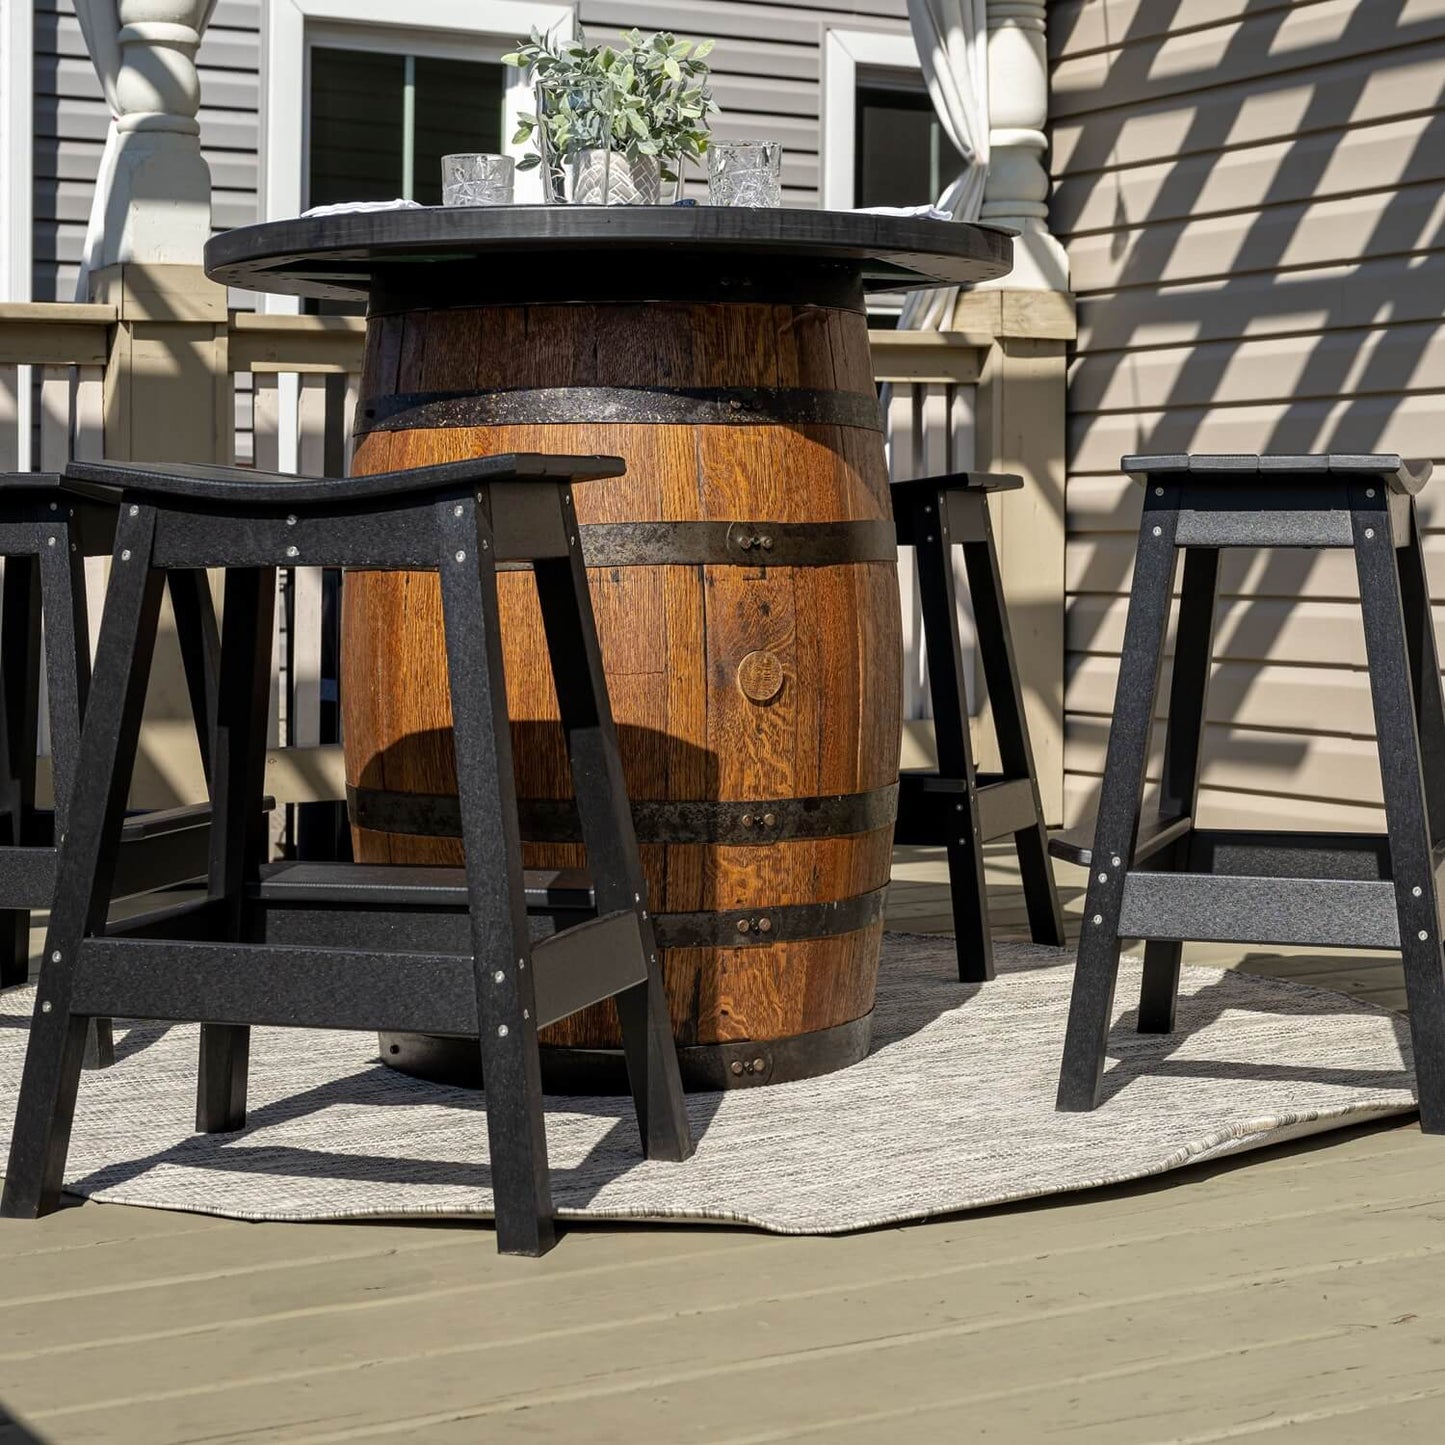 Outdoor Counter-Height Poly-Lumber Stools